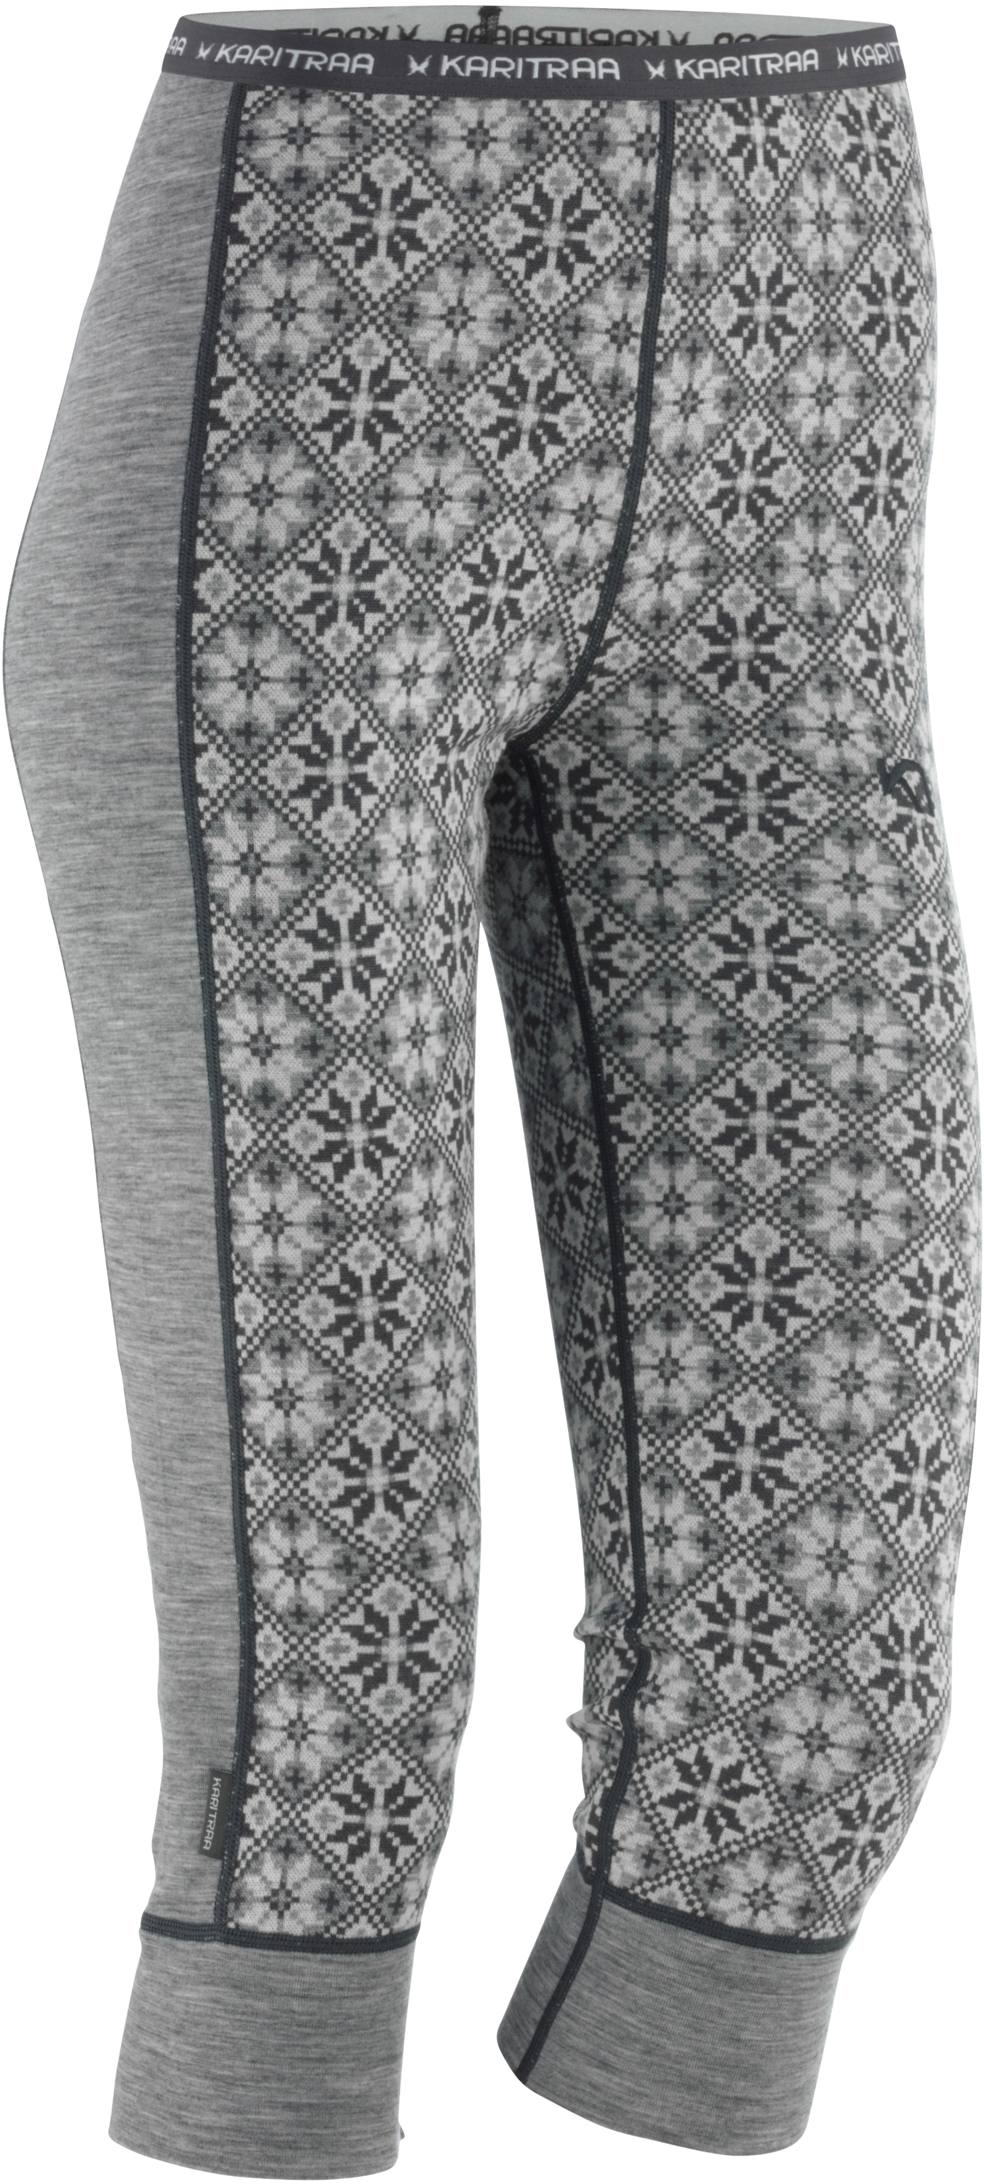 Women's functional 3/4 tights